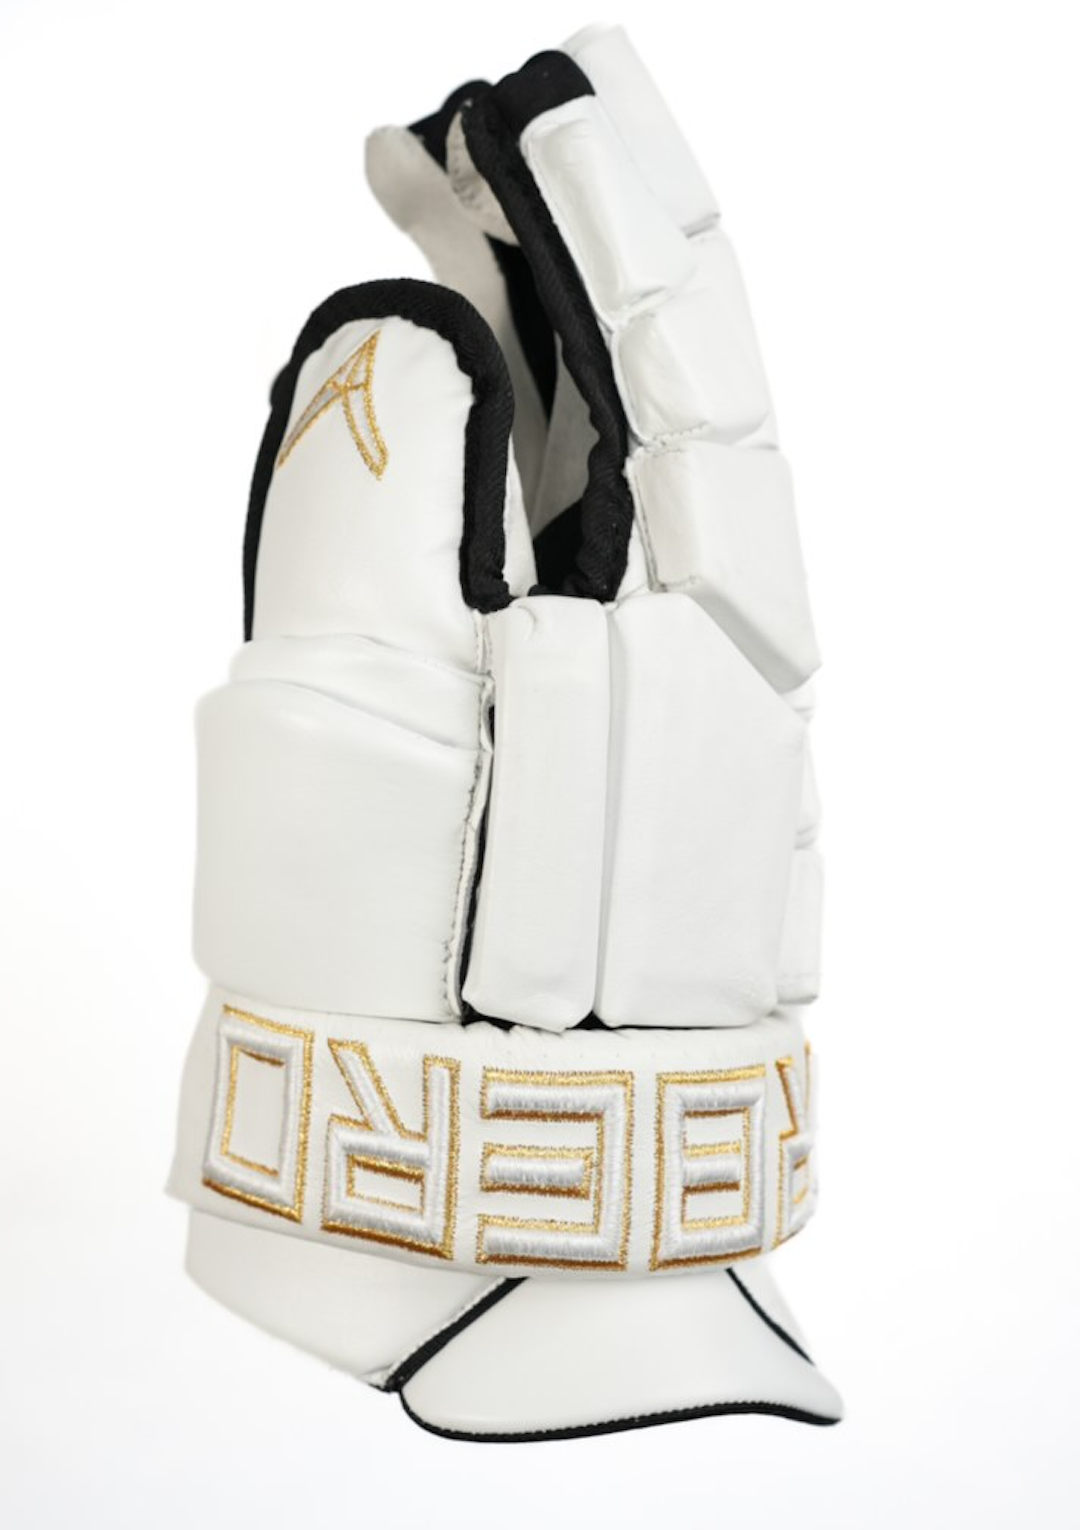 A clean hockey glove in white leather